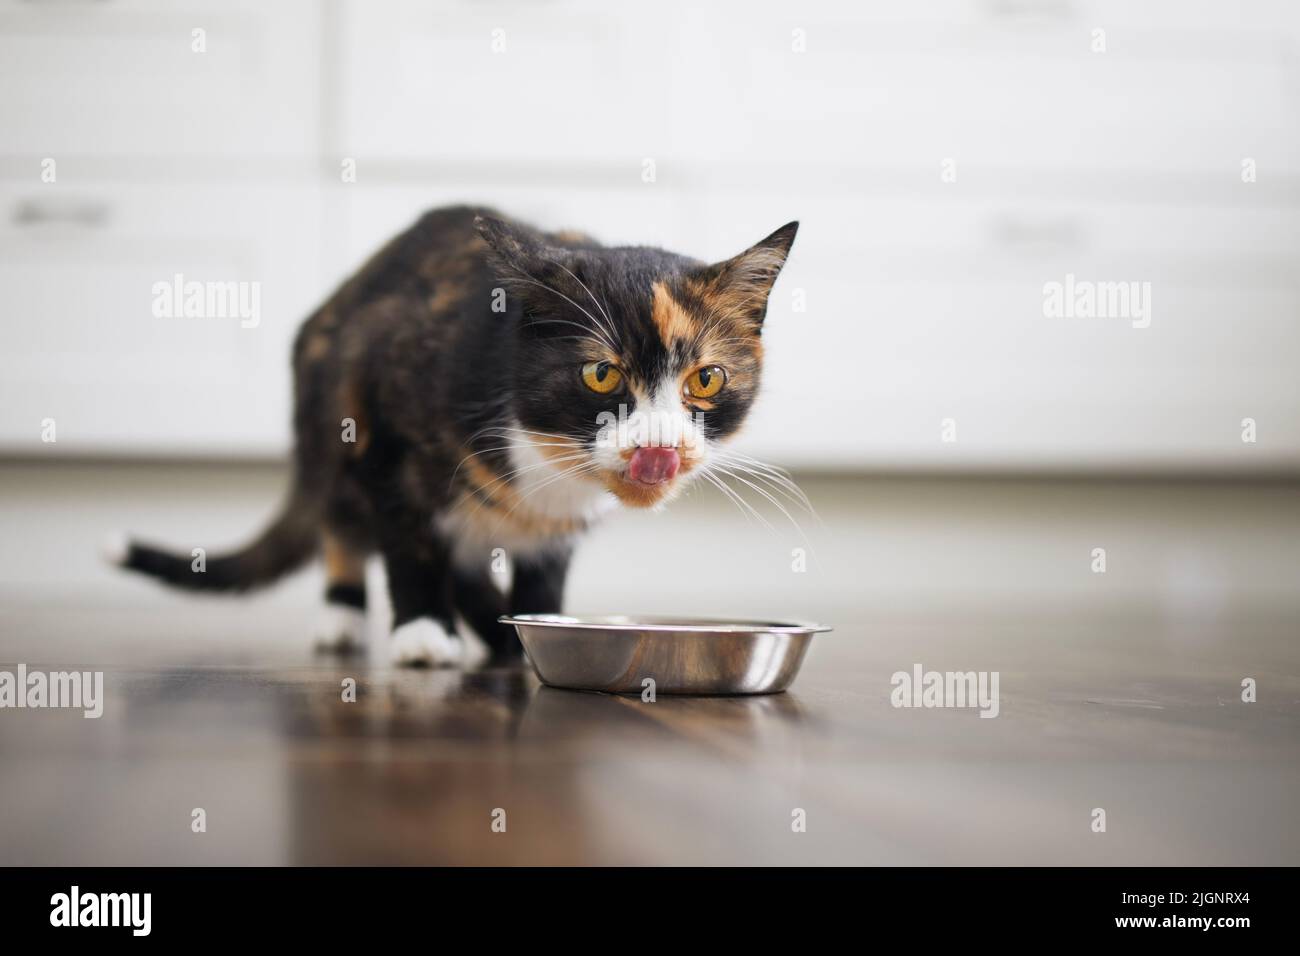 Domestic life with pet. Cute brown cat eating from metal bowl at home. Stock Photo